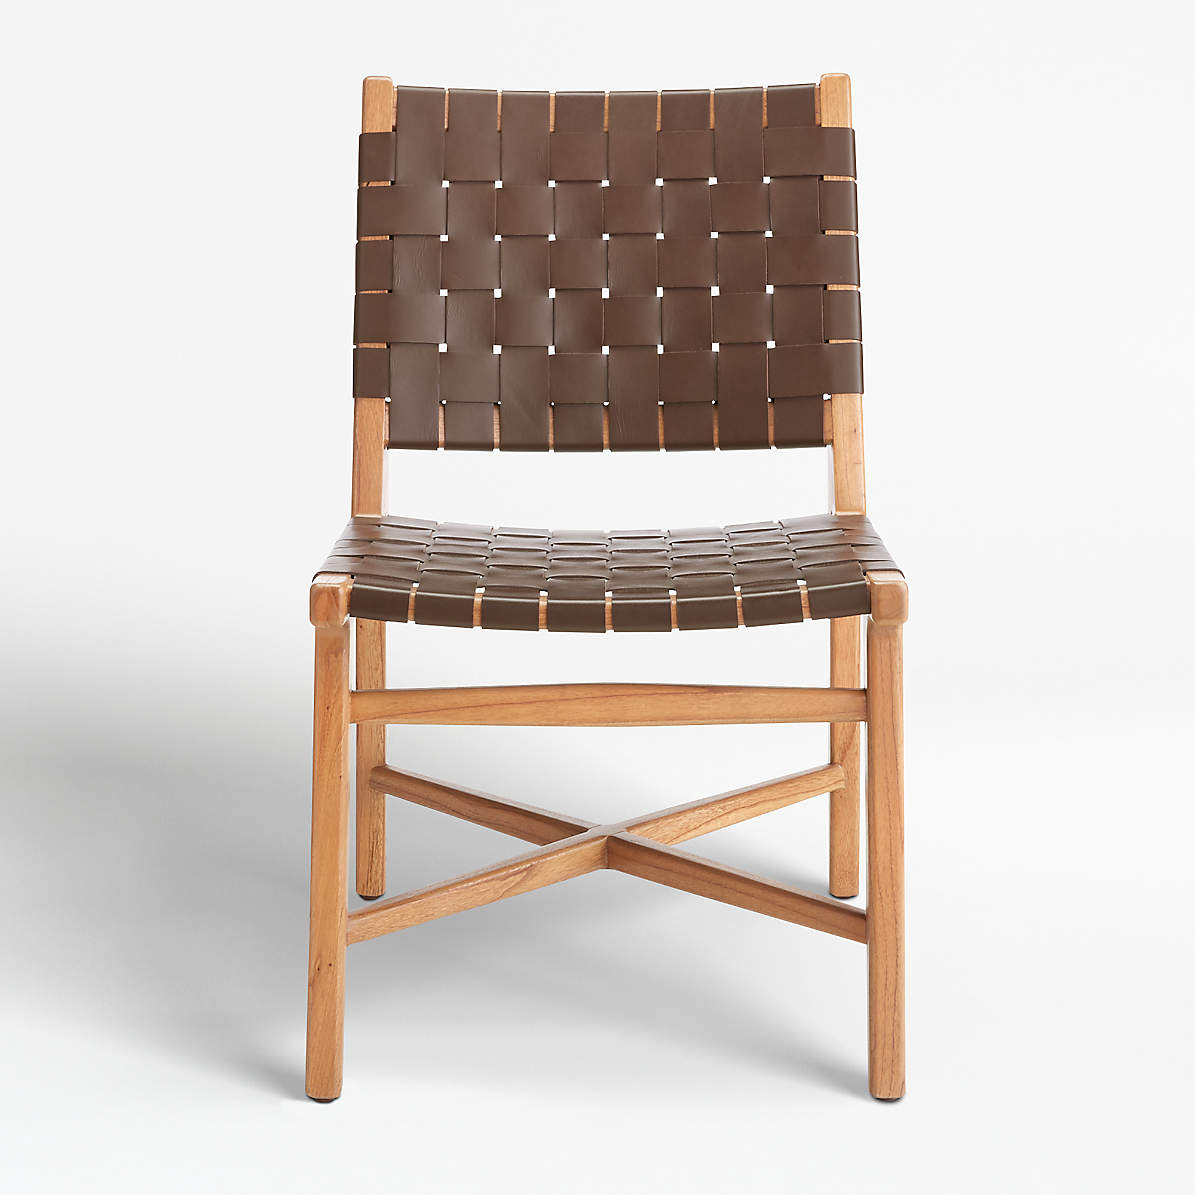 Taj Brown Woven Leather Dining Chair, Curved Back Woven Leather Dining Chair